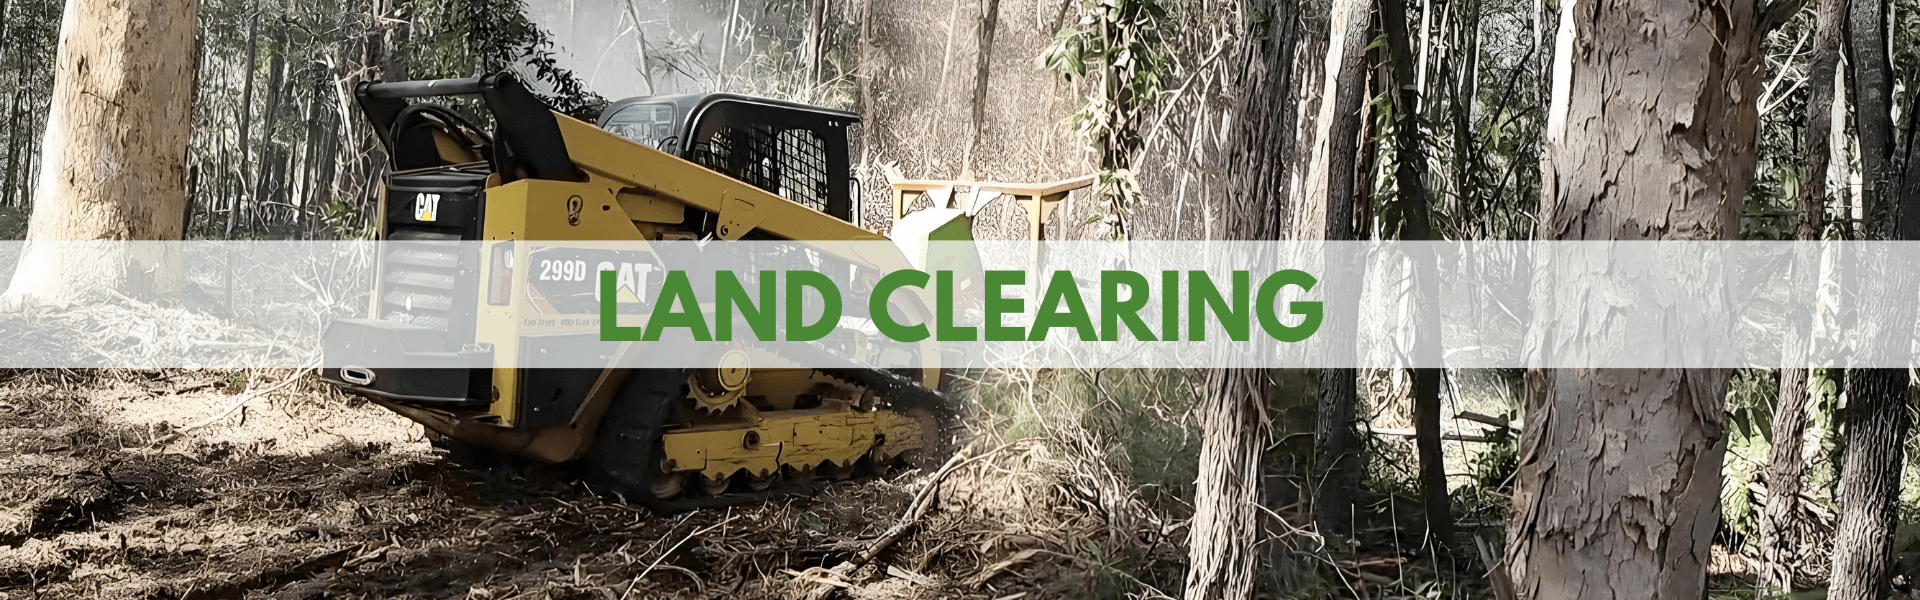 Land-Clearing